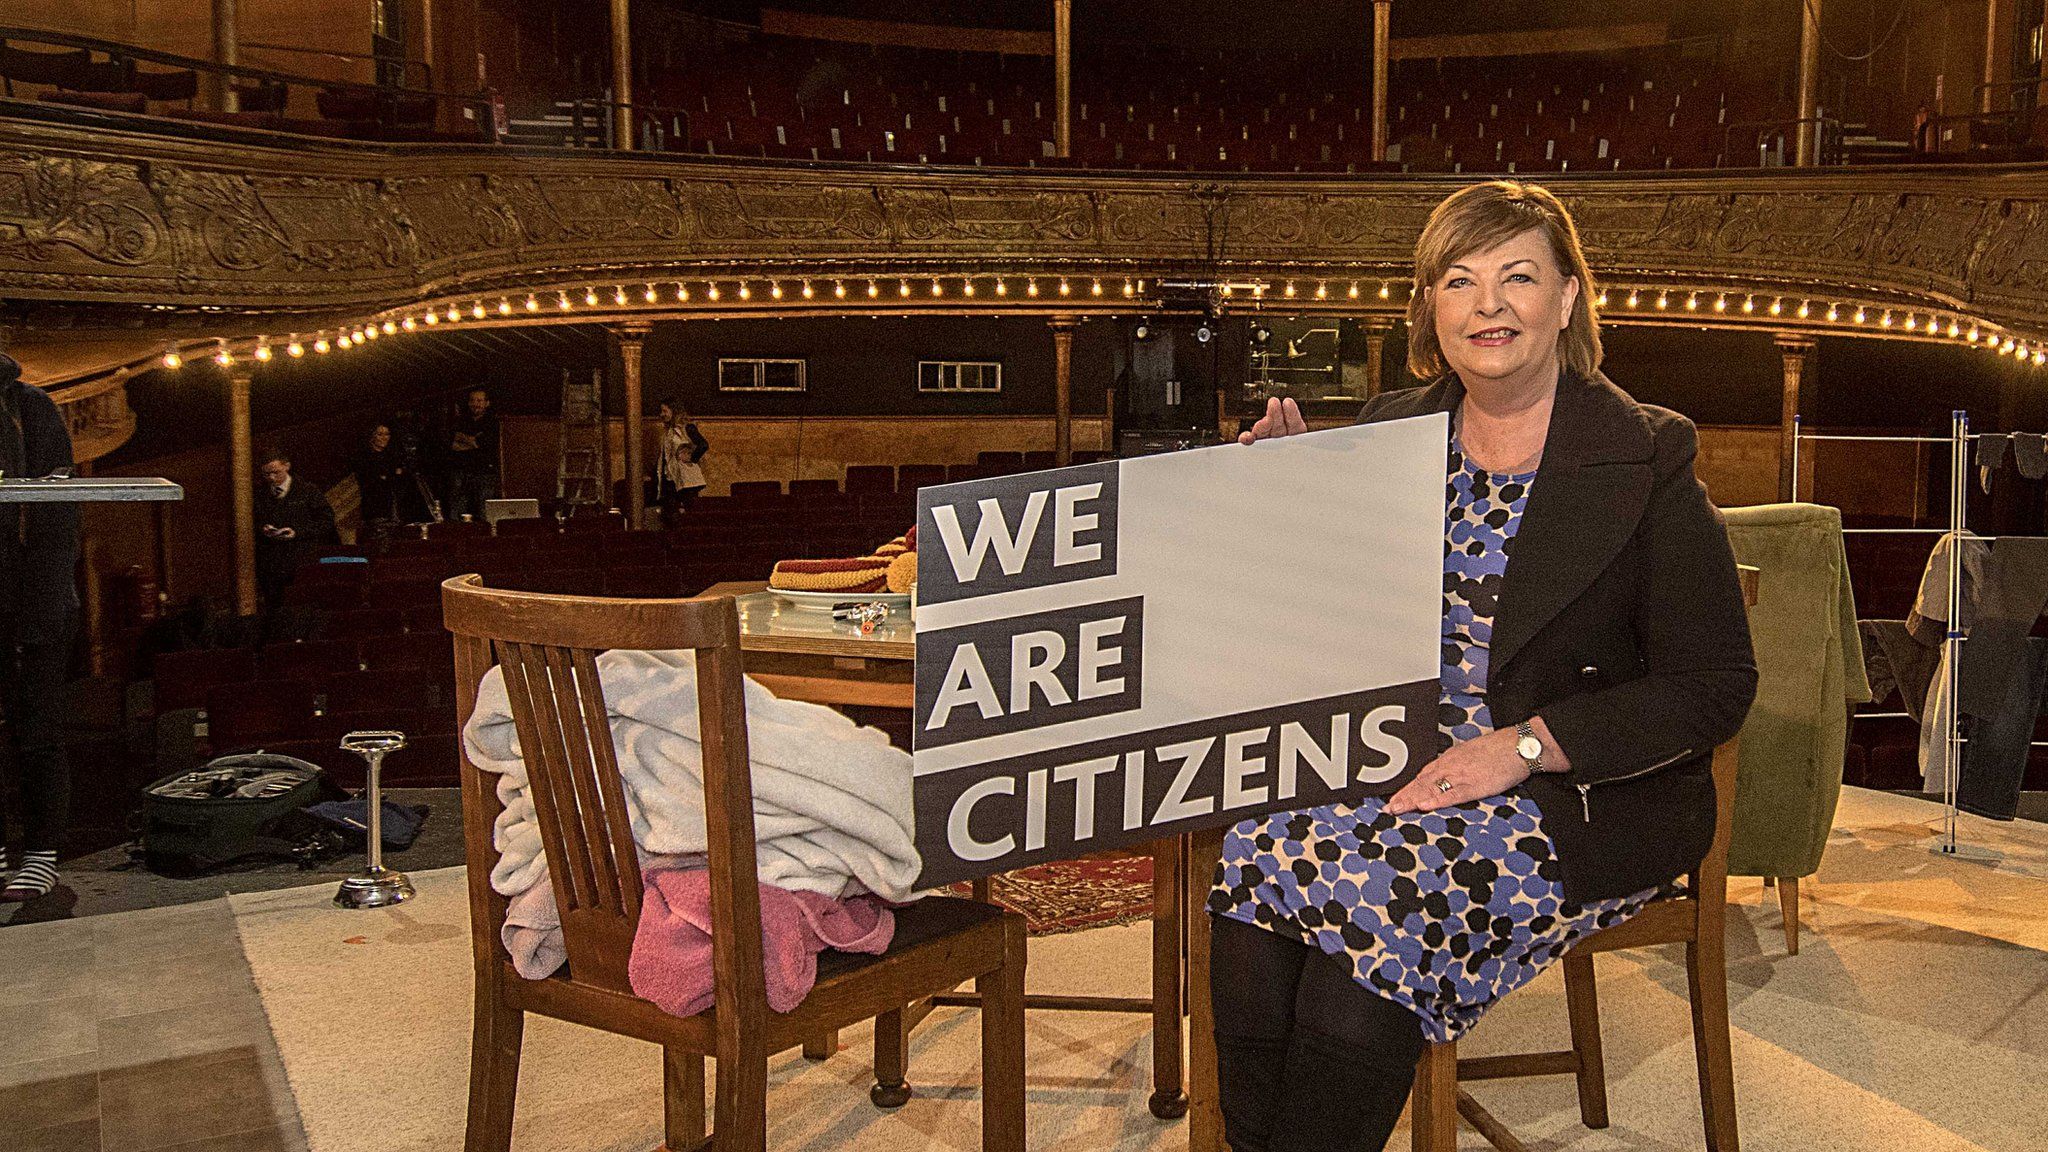 Culture Secretary Fiona Hyslop on stage at the Citizens Theatre